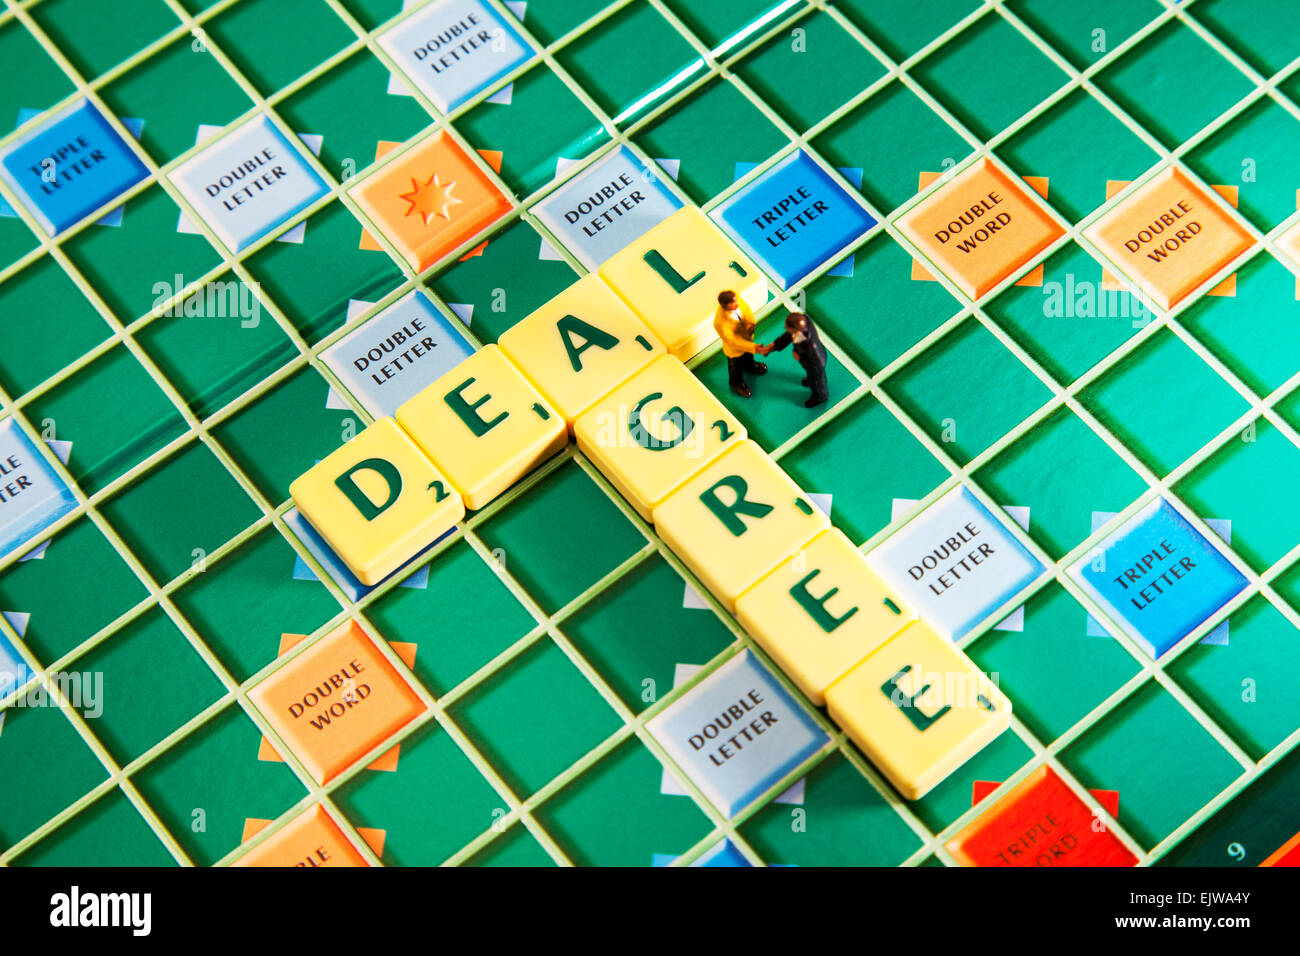 agree deal hand shake hands seal binding gentlemen agreement words using scrabble tiles to illustrate spelling spell out Stock Photo